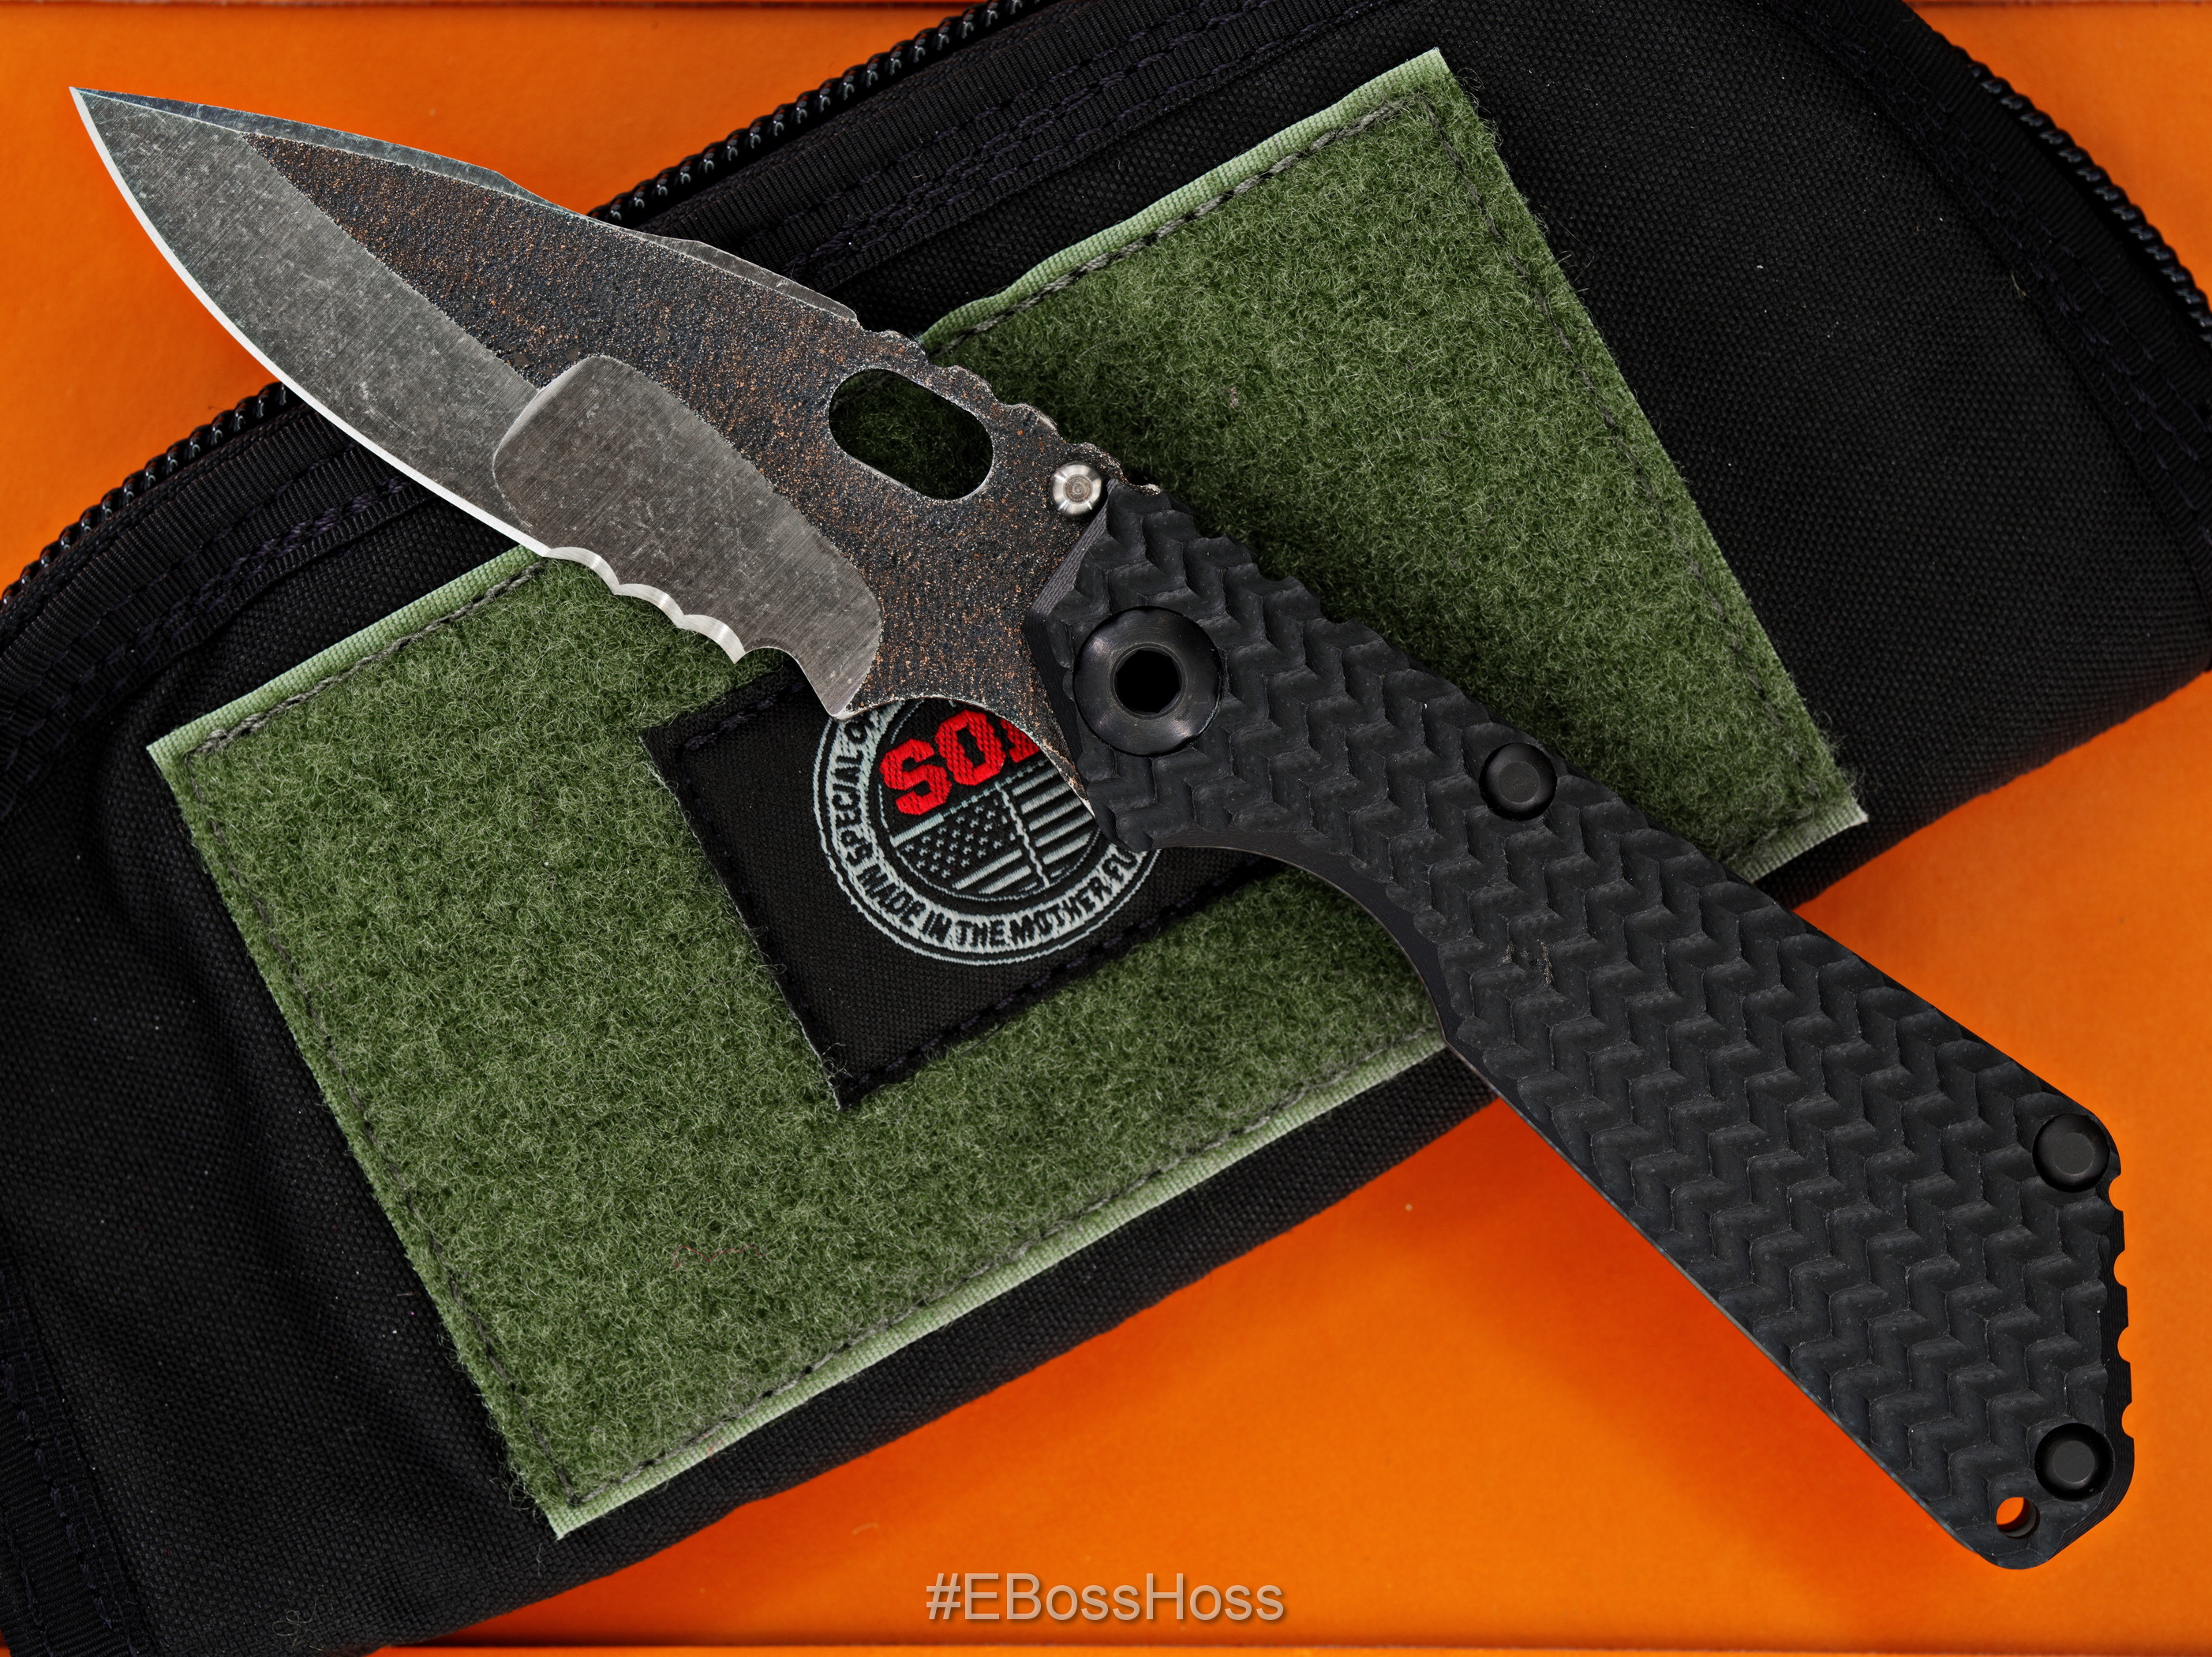 Mick Strider Custom Tire-Tread Nightmare SnG with Triscula Grind